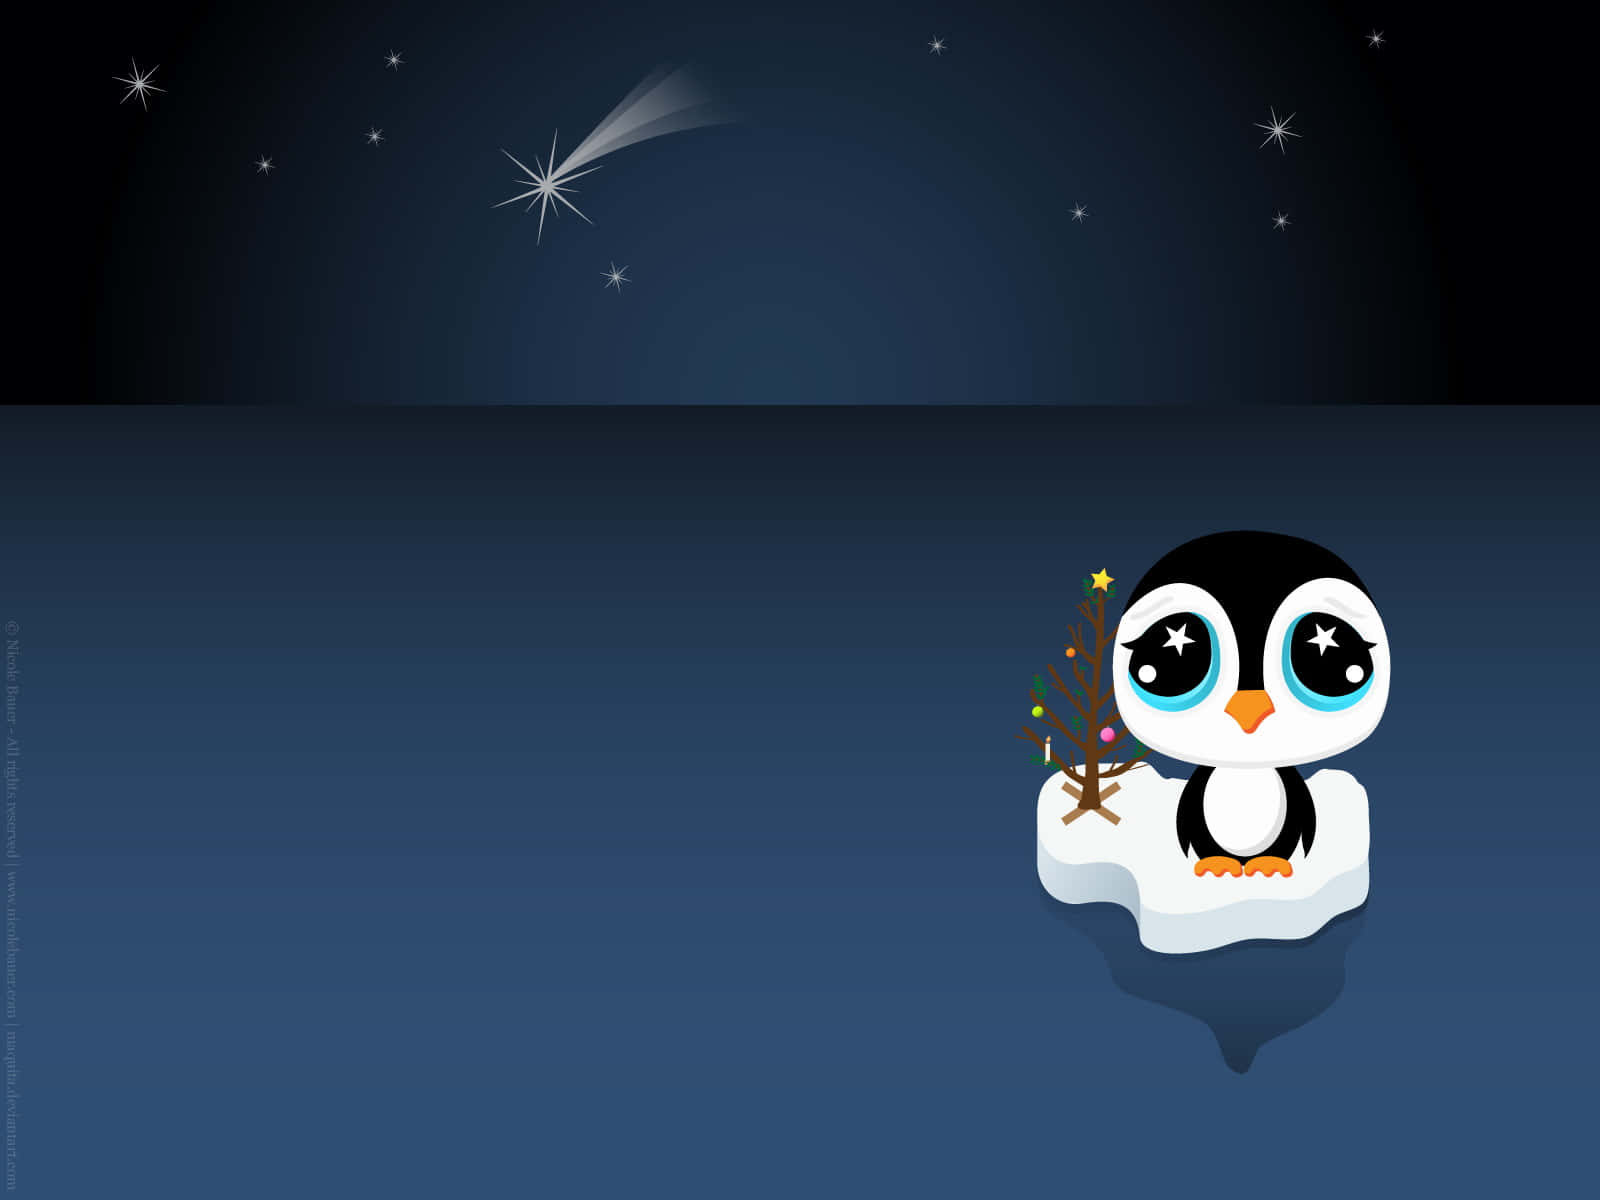 A Penguin Sitting On An Iceberg With Stars In The Sky Wallpaper